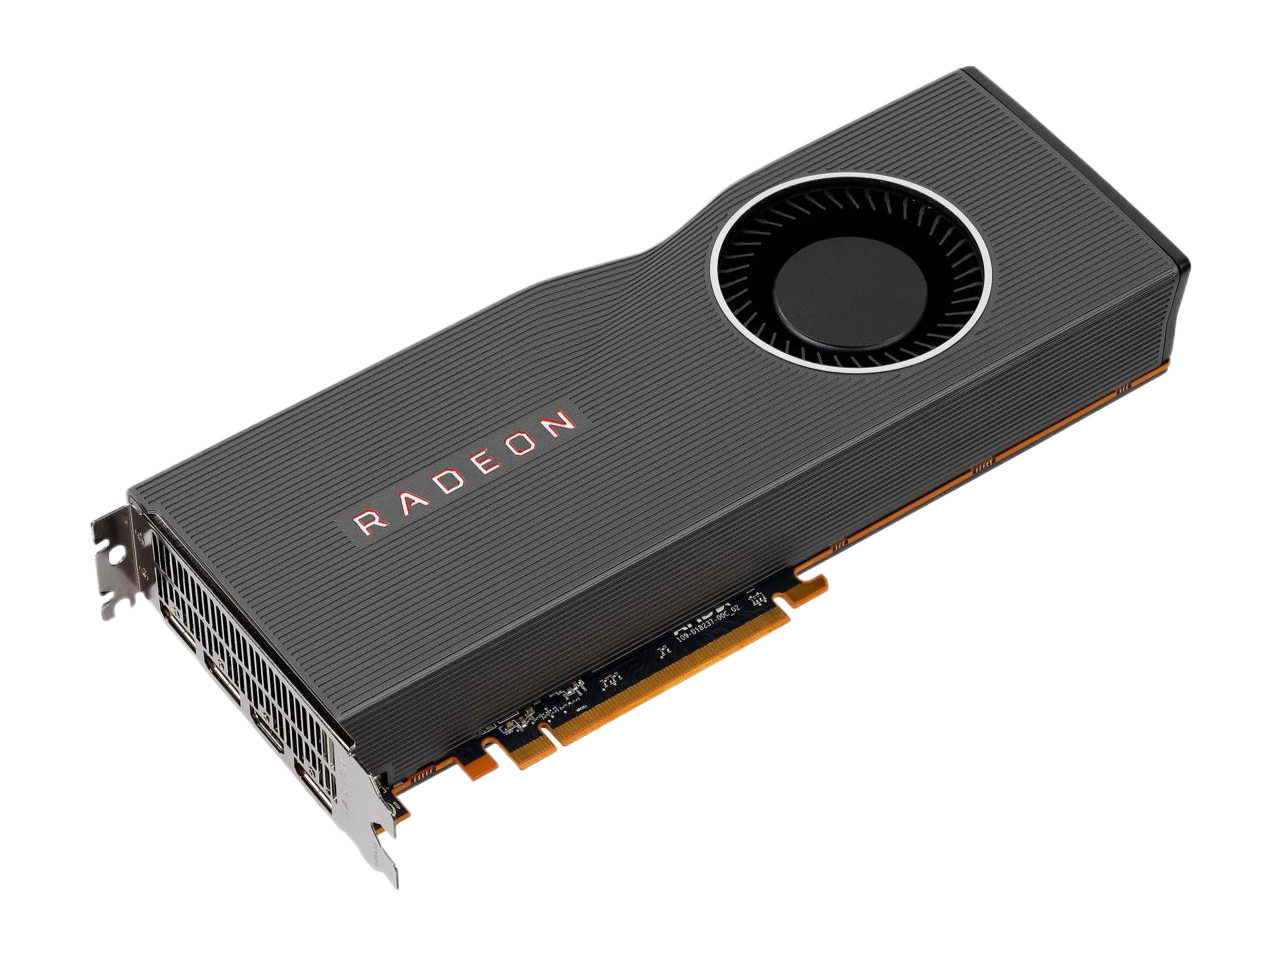 ASUS Radeon RX 5700 XT PCIe 4.0 VR Ready Graphics Card with 8GB GDDR6 Video Graphics Card RX5700XT-8G